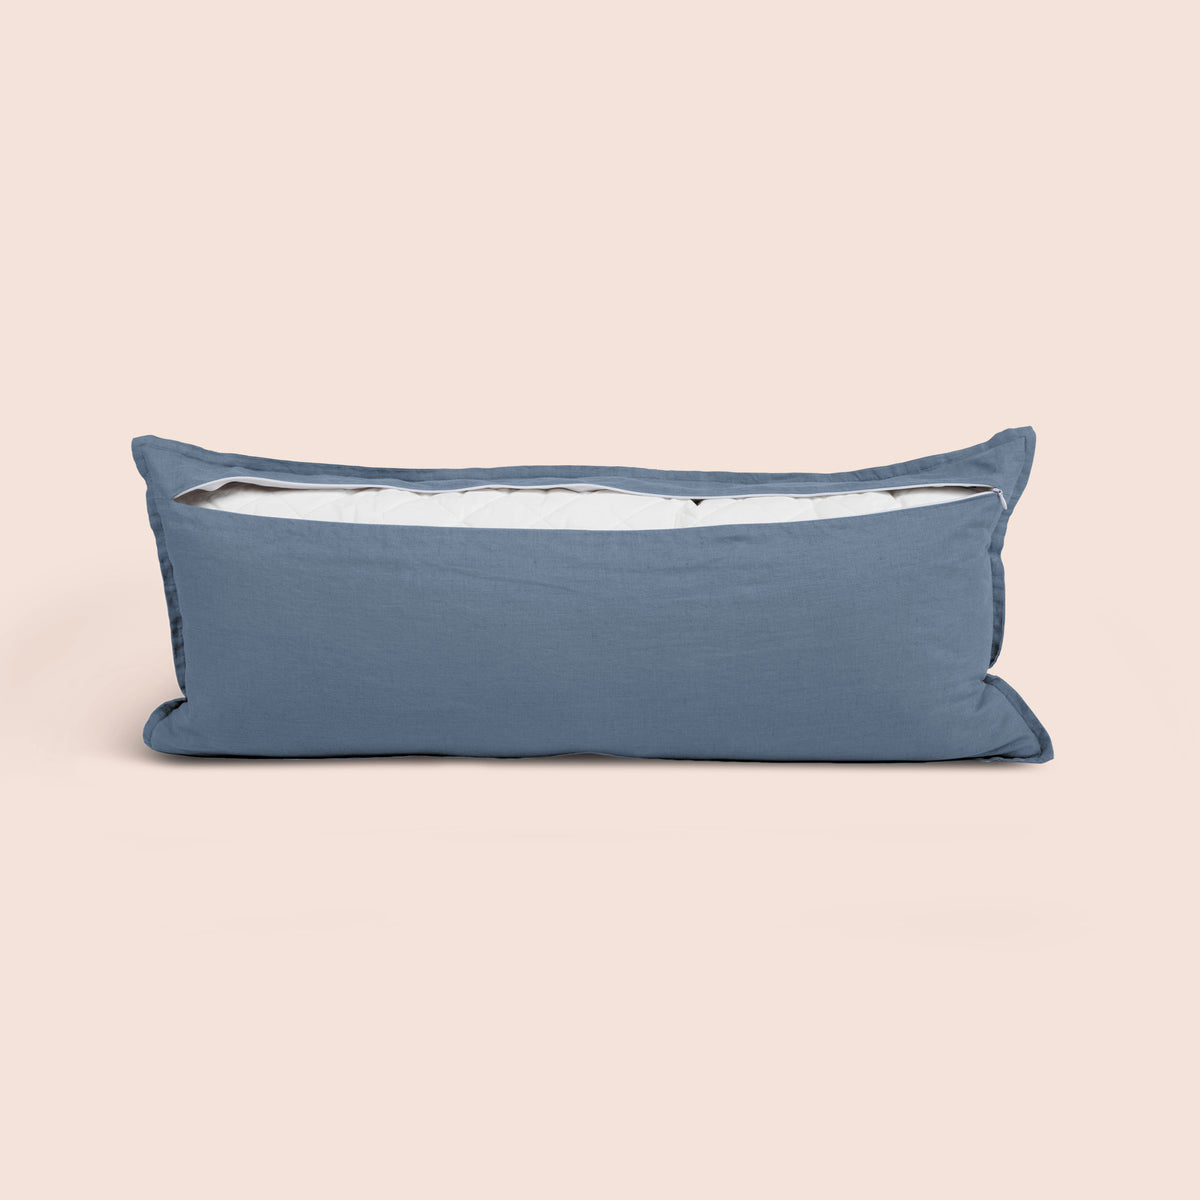 Image of the back of the Catalina Blue Blended Linen Lumbar Pillow Cover on a lumbar pillow with the back zipper open on a light pink background